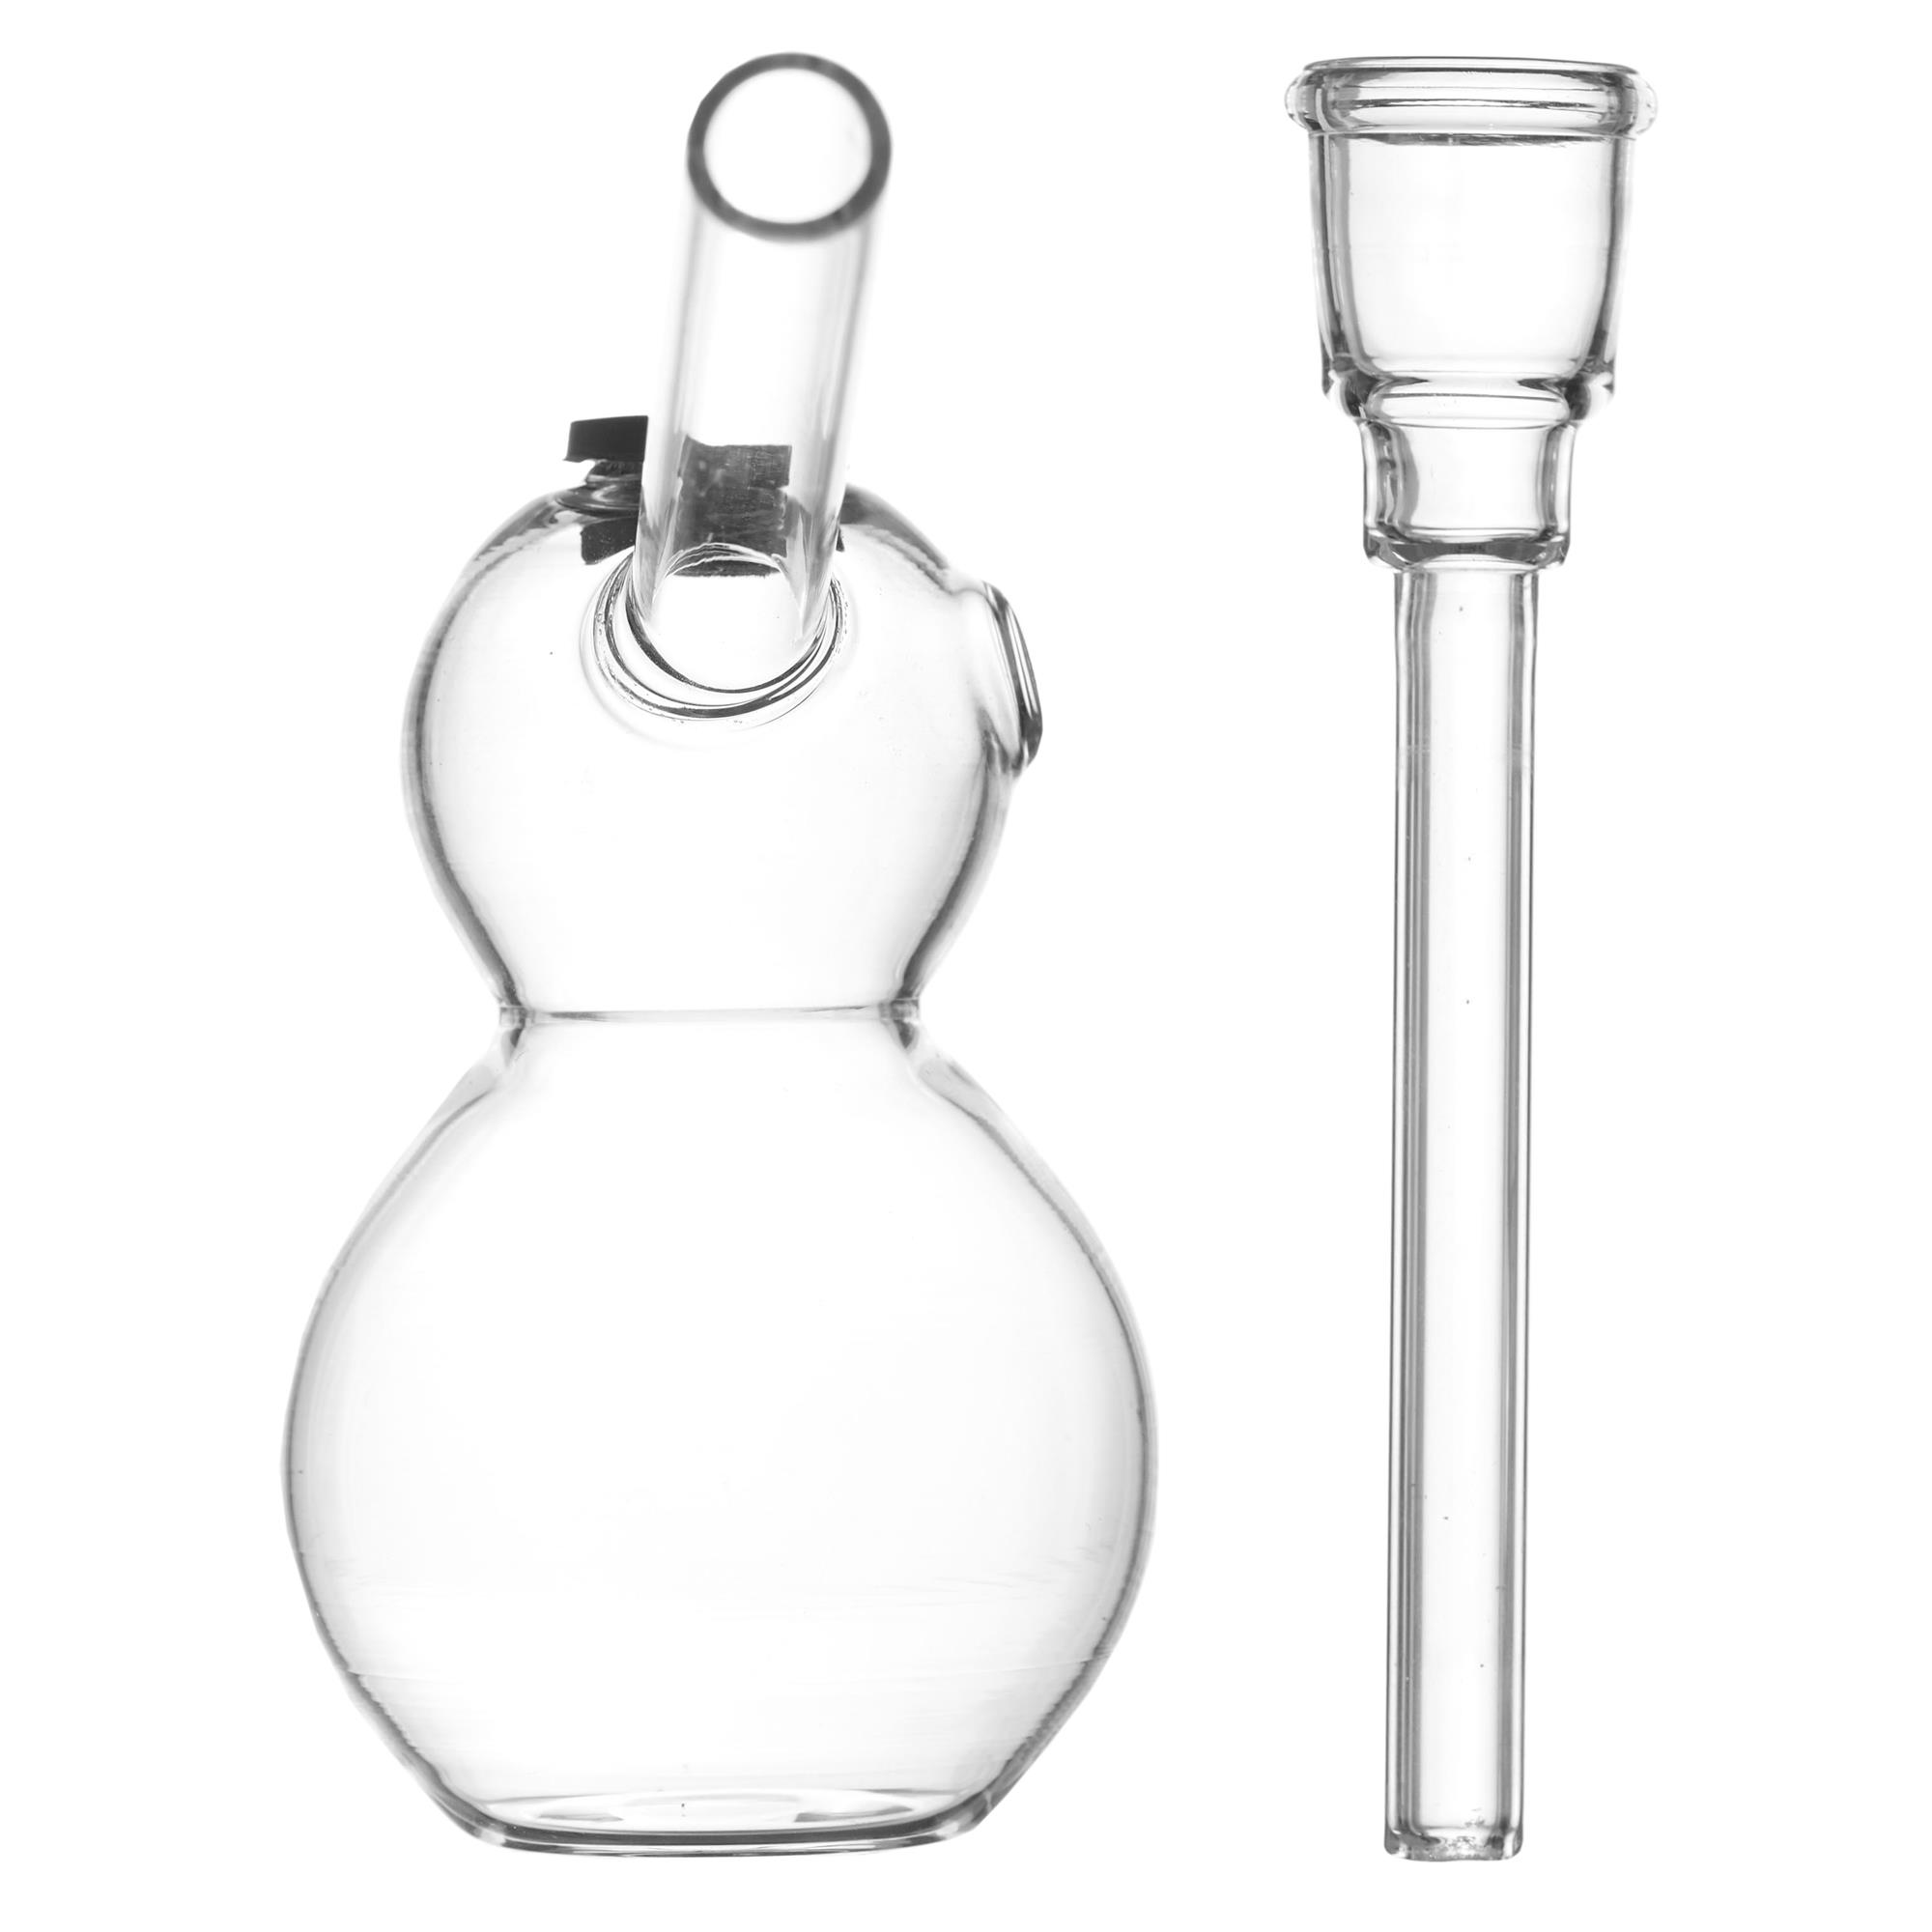 THE SNOWMAN GLASS BONG HAND PIPE